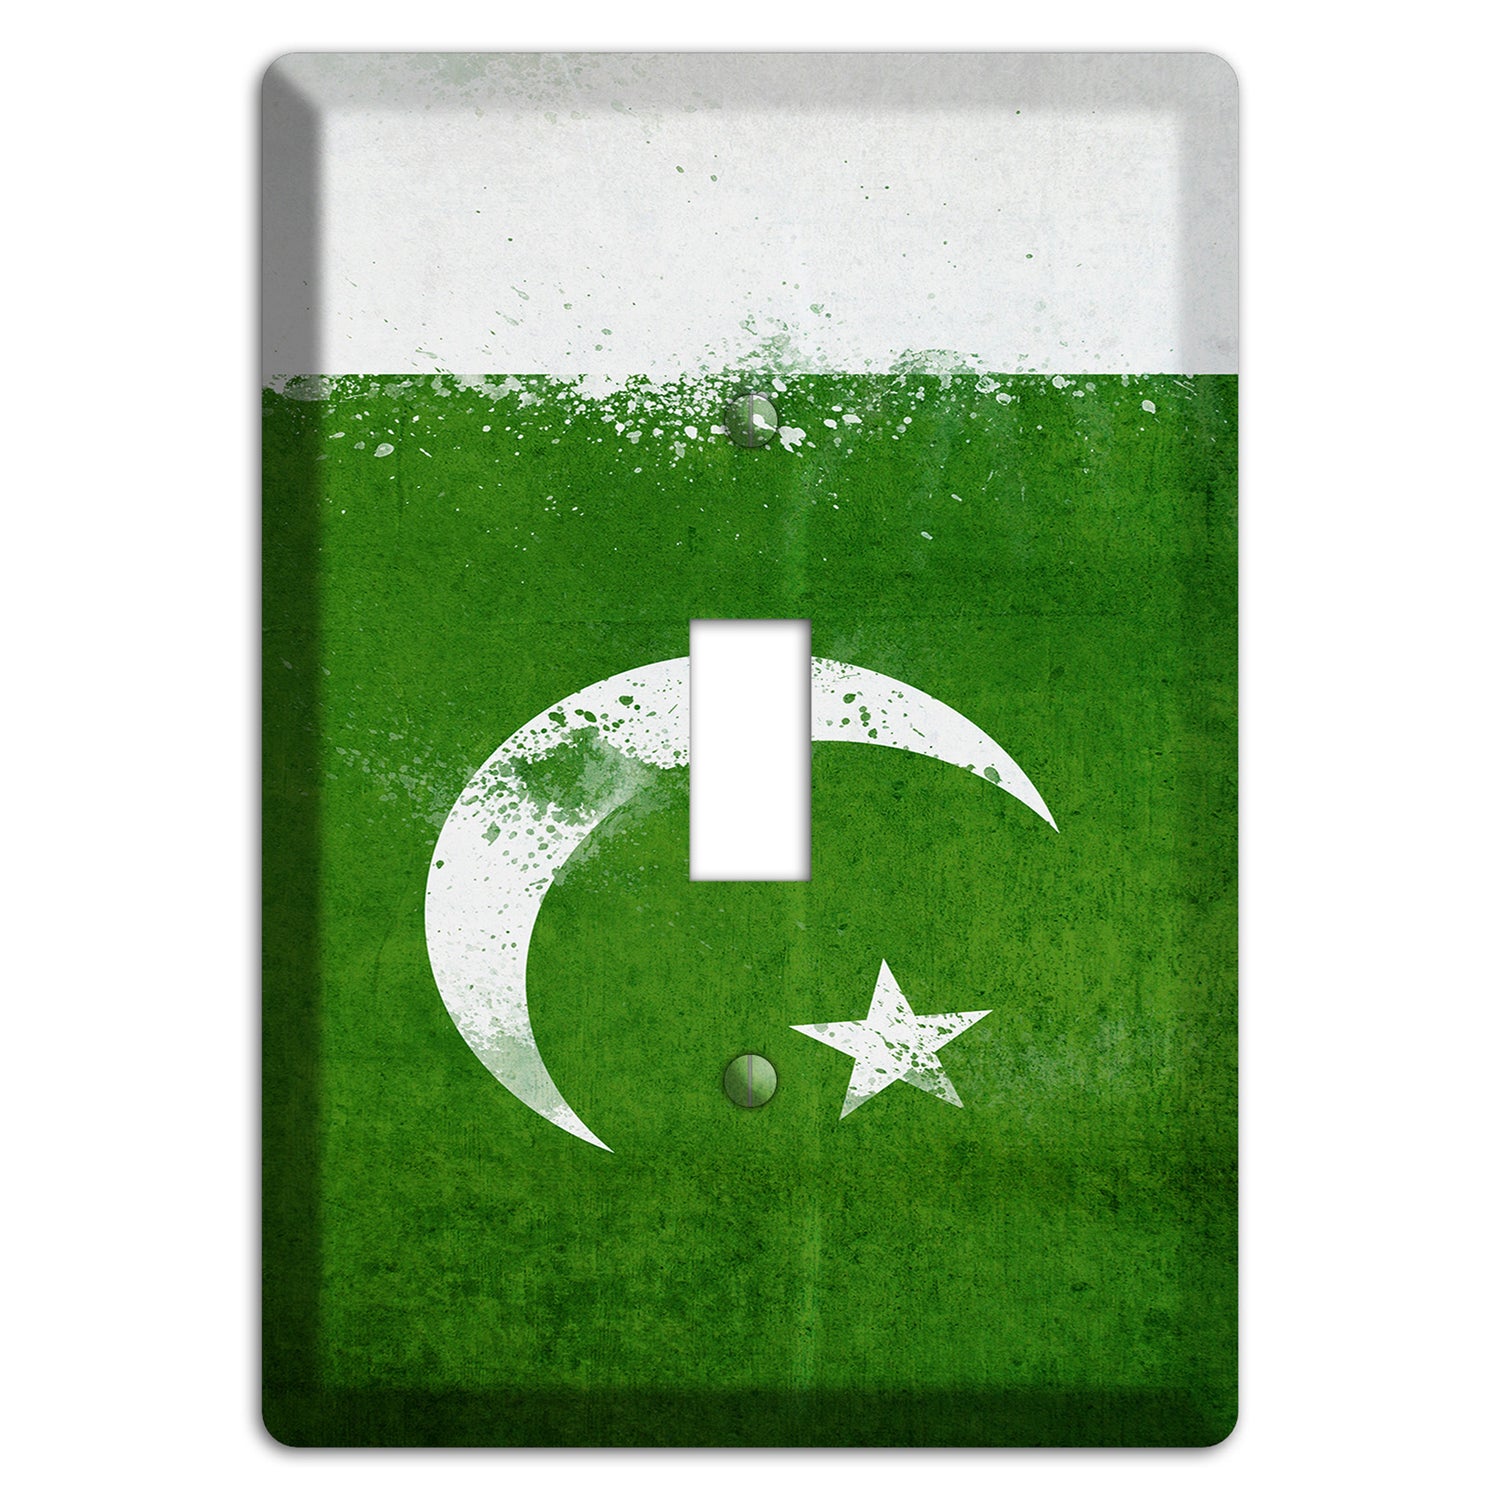 Pakistan Cover Plates Cover Plates